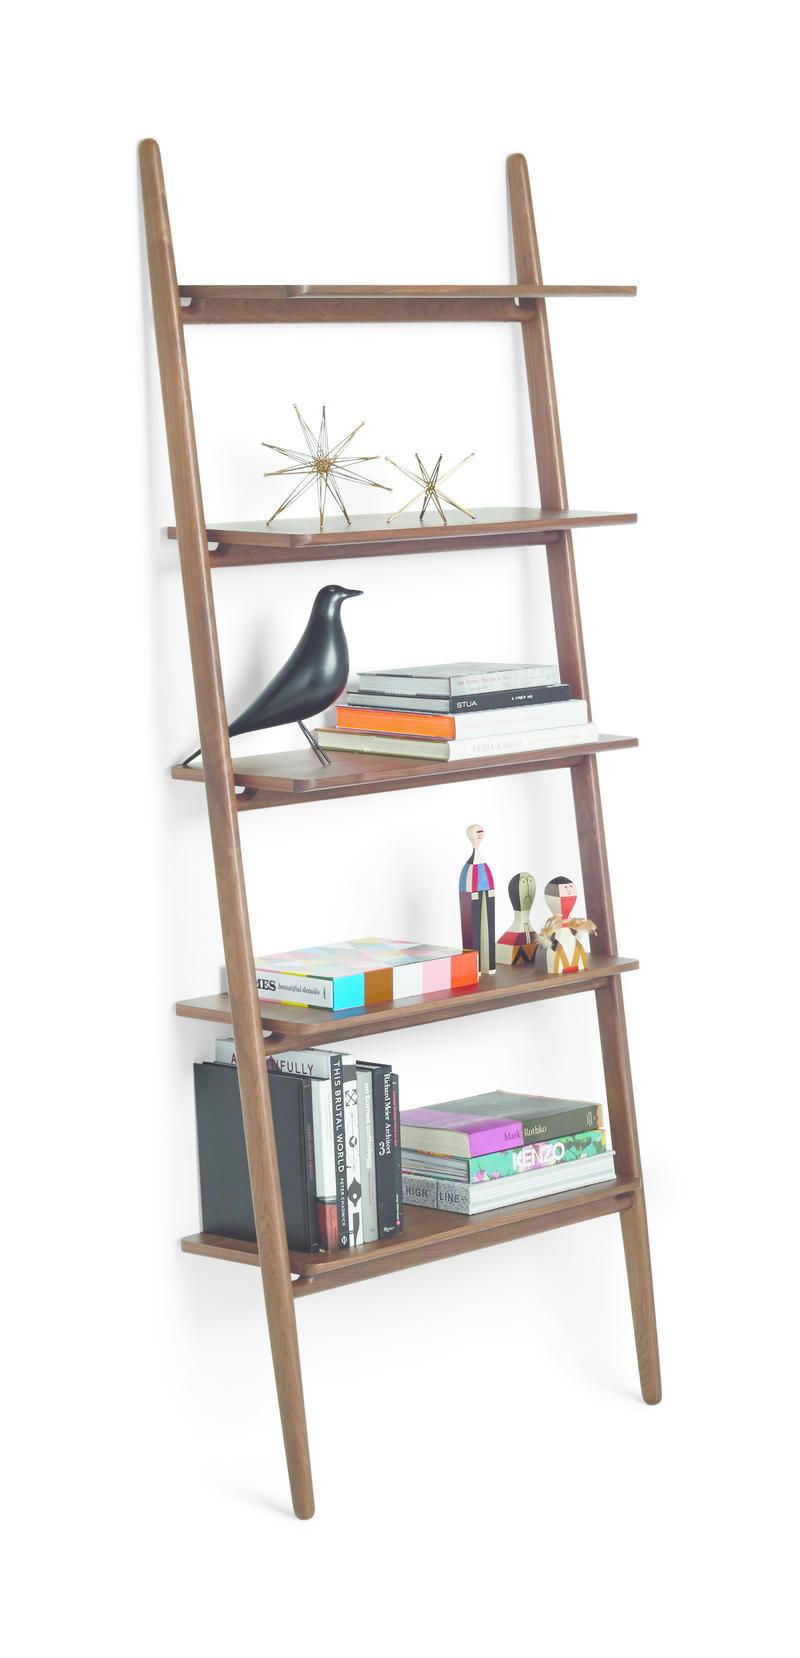 Folk Ladder Shelving is another of DWR's millennial must-haves